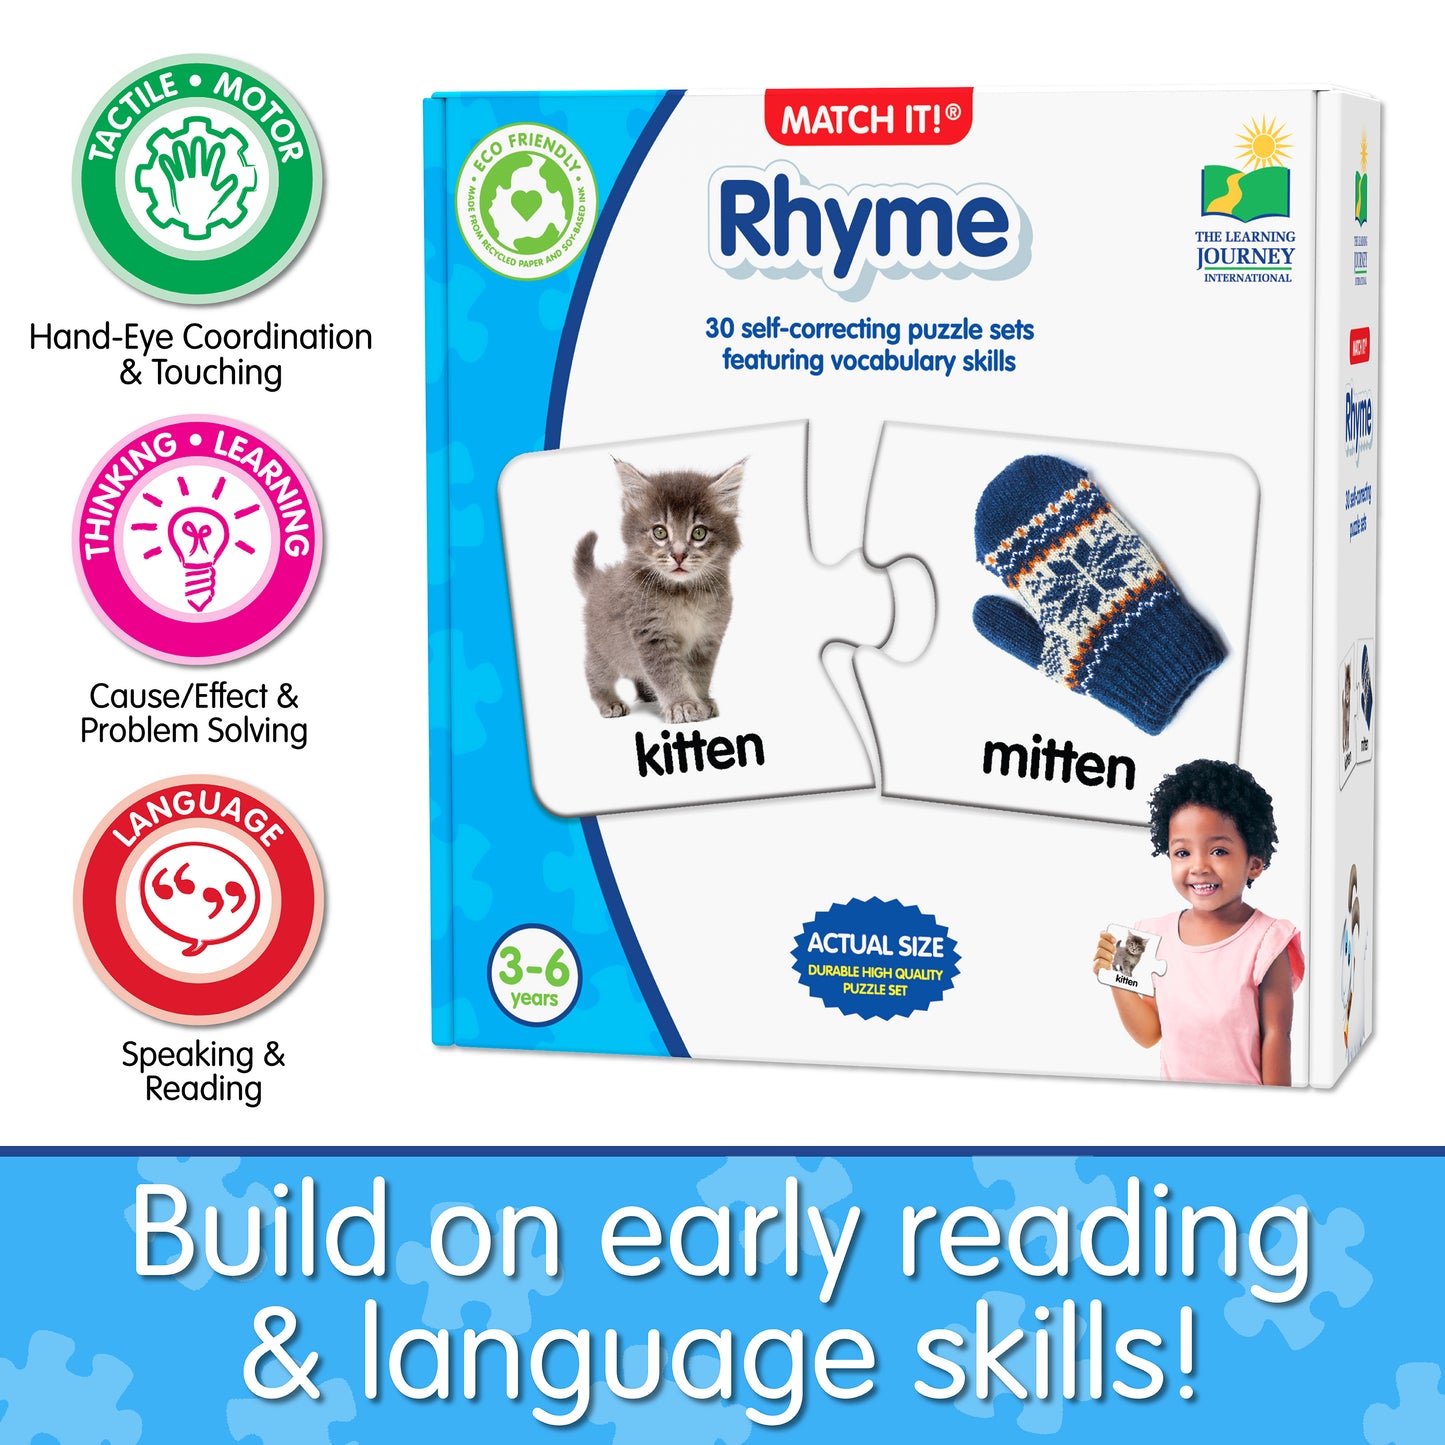 Infographic about Match It - Rhyme's educational benefits that says, "Build on early reading and language skills!"